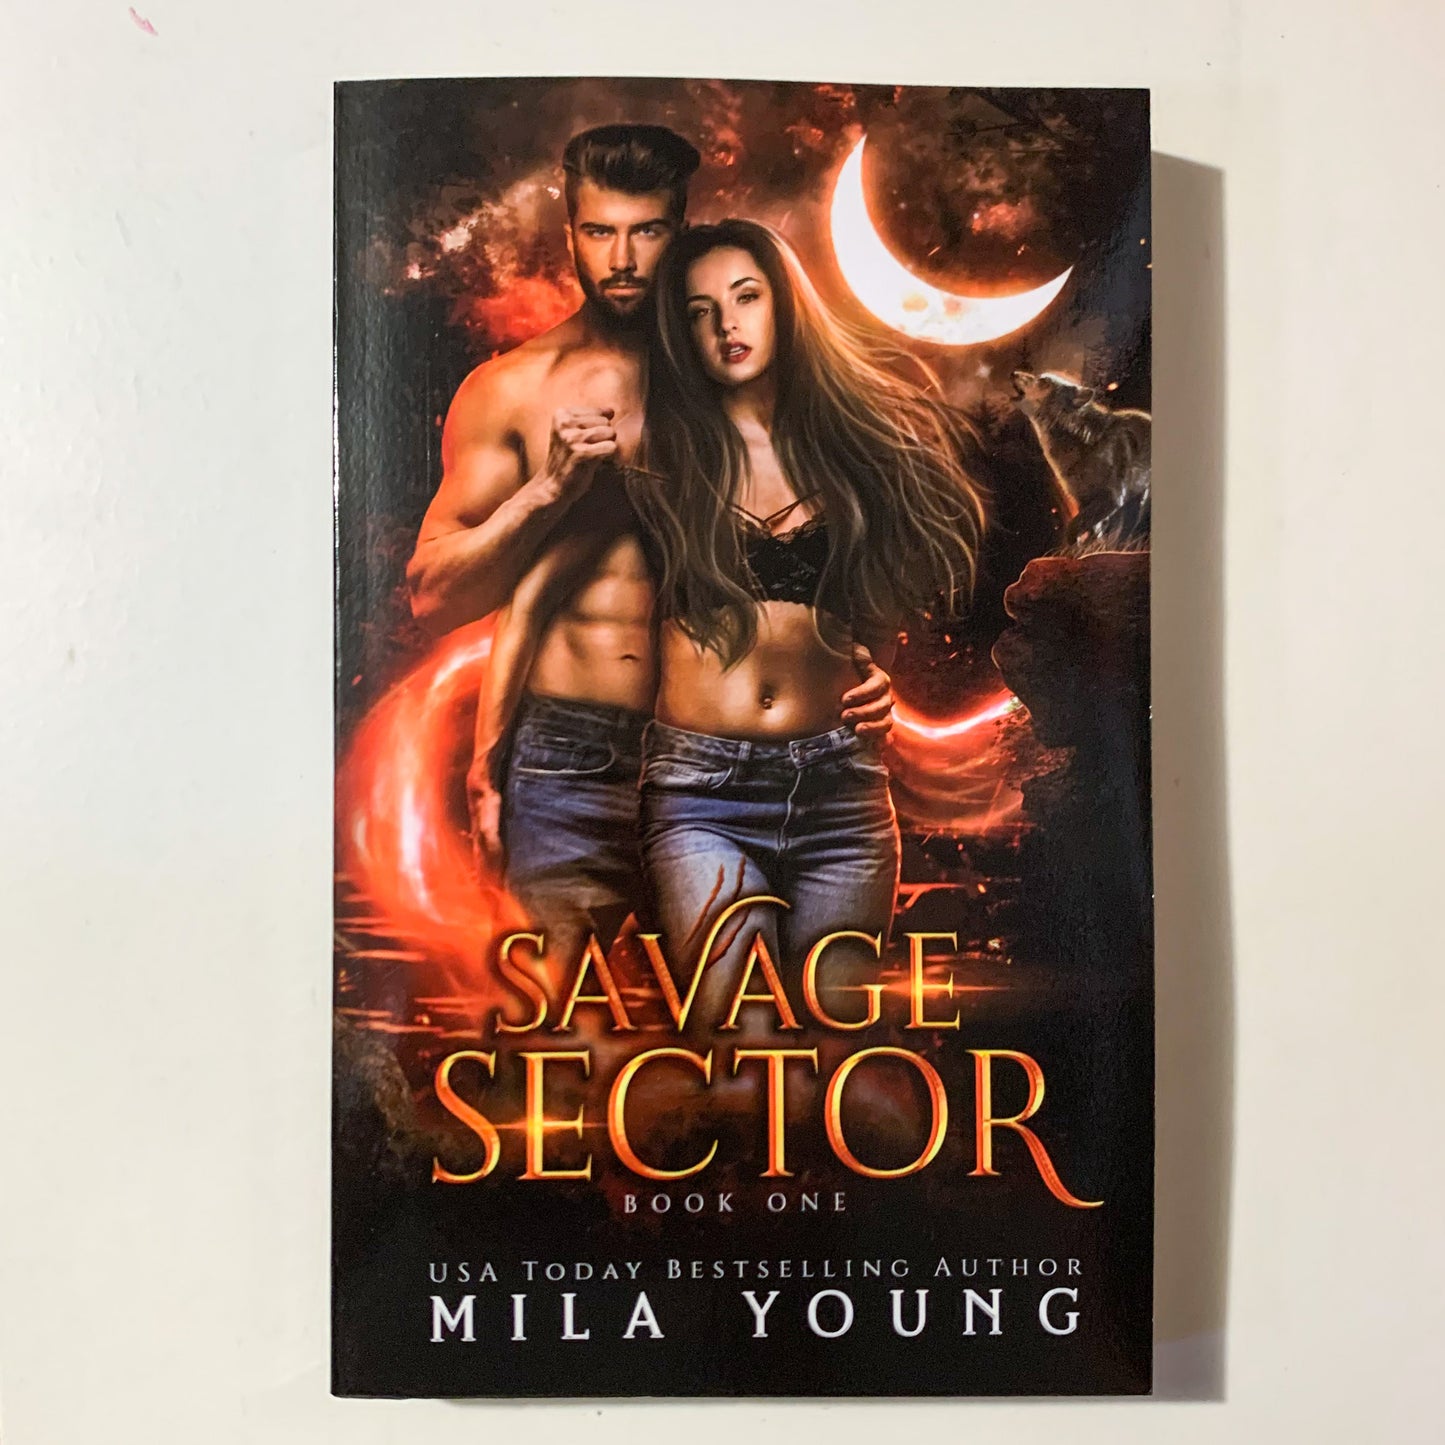 Savage Sector by Mila Young (imperfect copy)